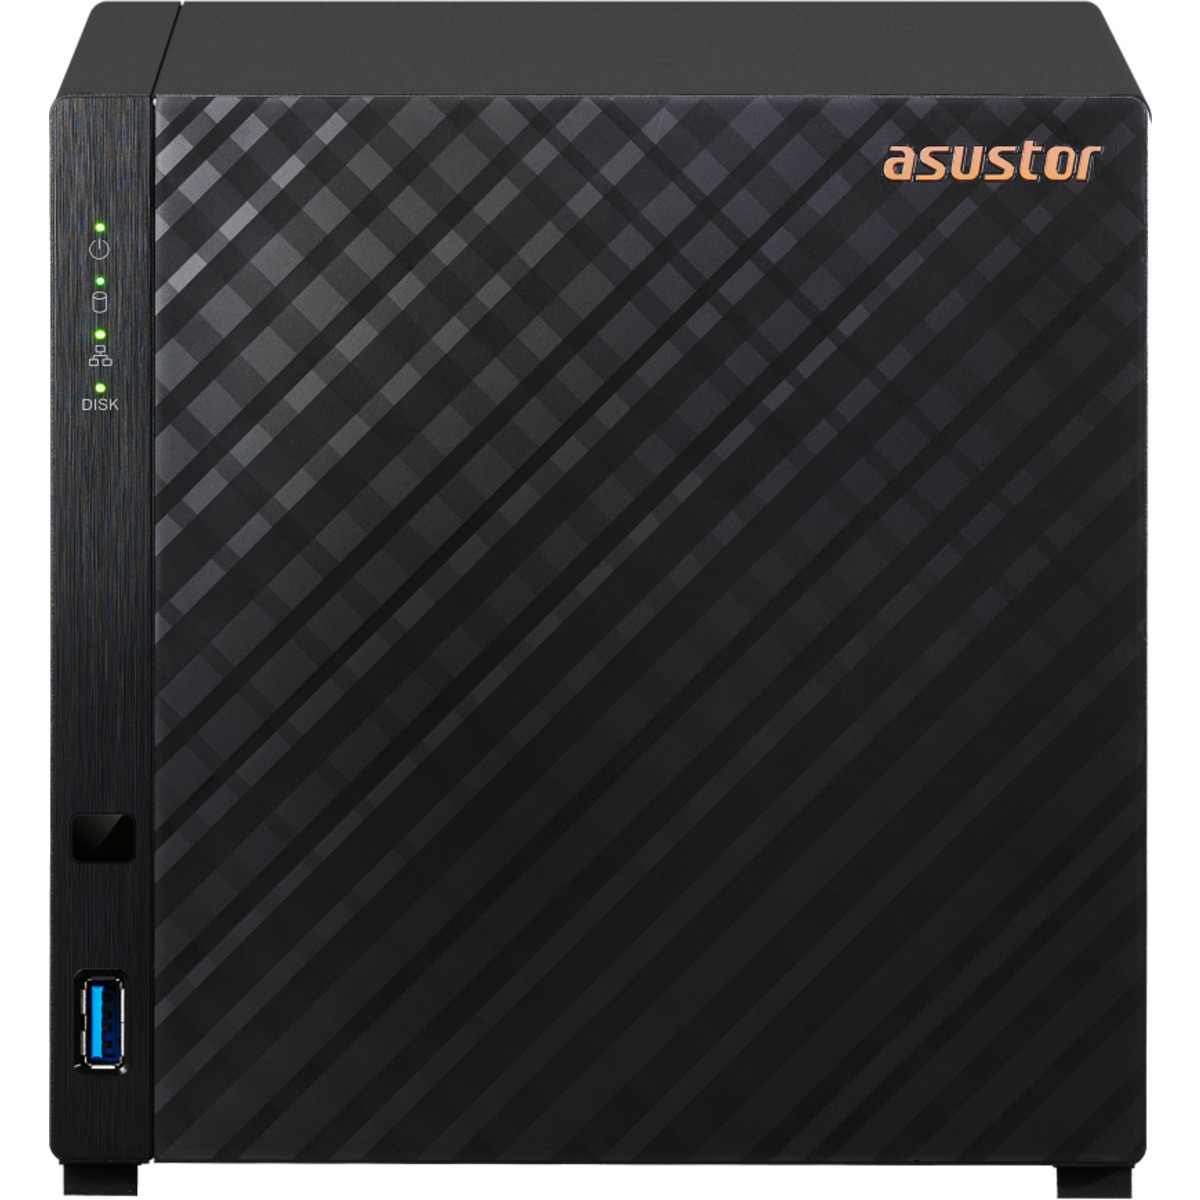 buy $2450 ASUSTOR DRIVESTOR 4 AS1104T 88tb Desktop NAS - Network Attached Storage Device 4x22000gb Seagate IronWolf Pro ST22000NT001 3.5 7200rpm SATA 6Gb/s HDD NAS Class Drives Installed - Burn-In Tested - nas headquarters buy network attached storage server device das new raid-5 free shipping simply usa DRIVESTOR 4 AS1104T